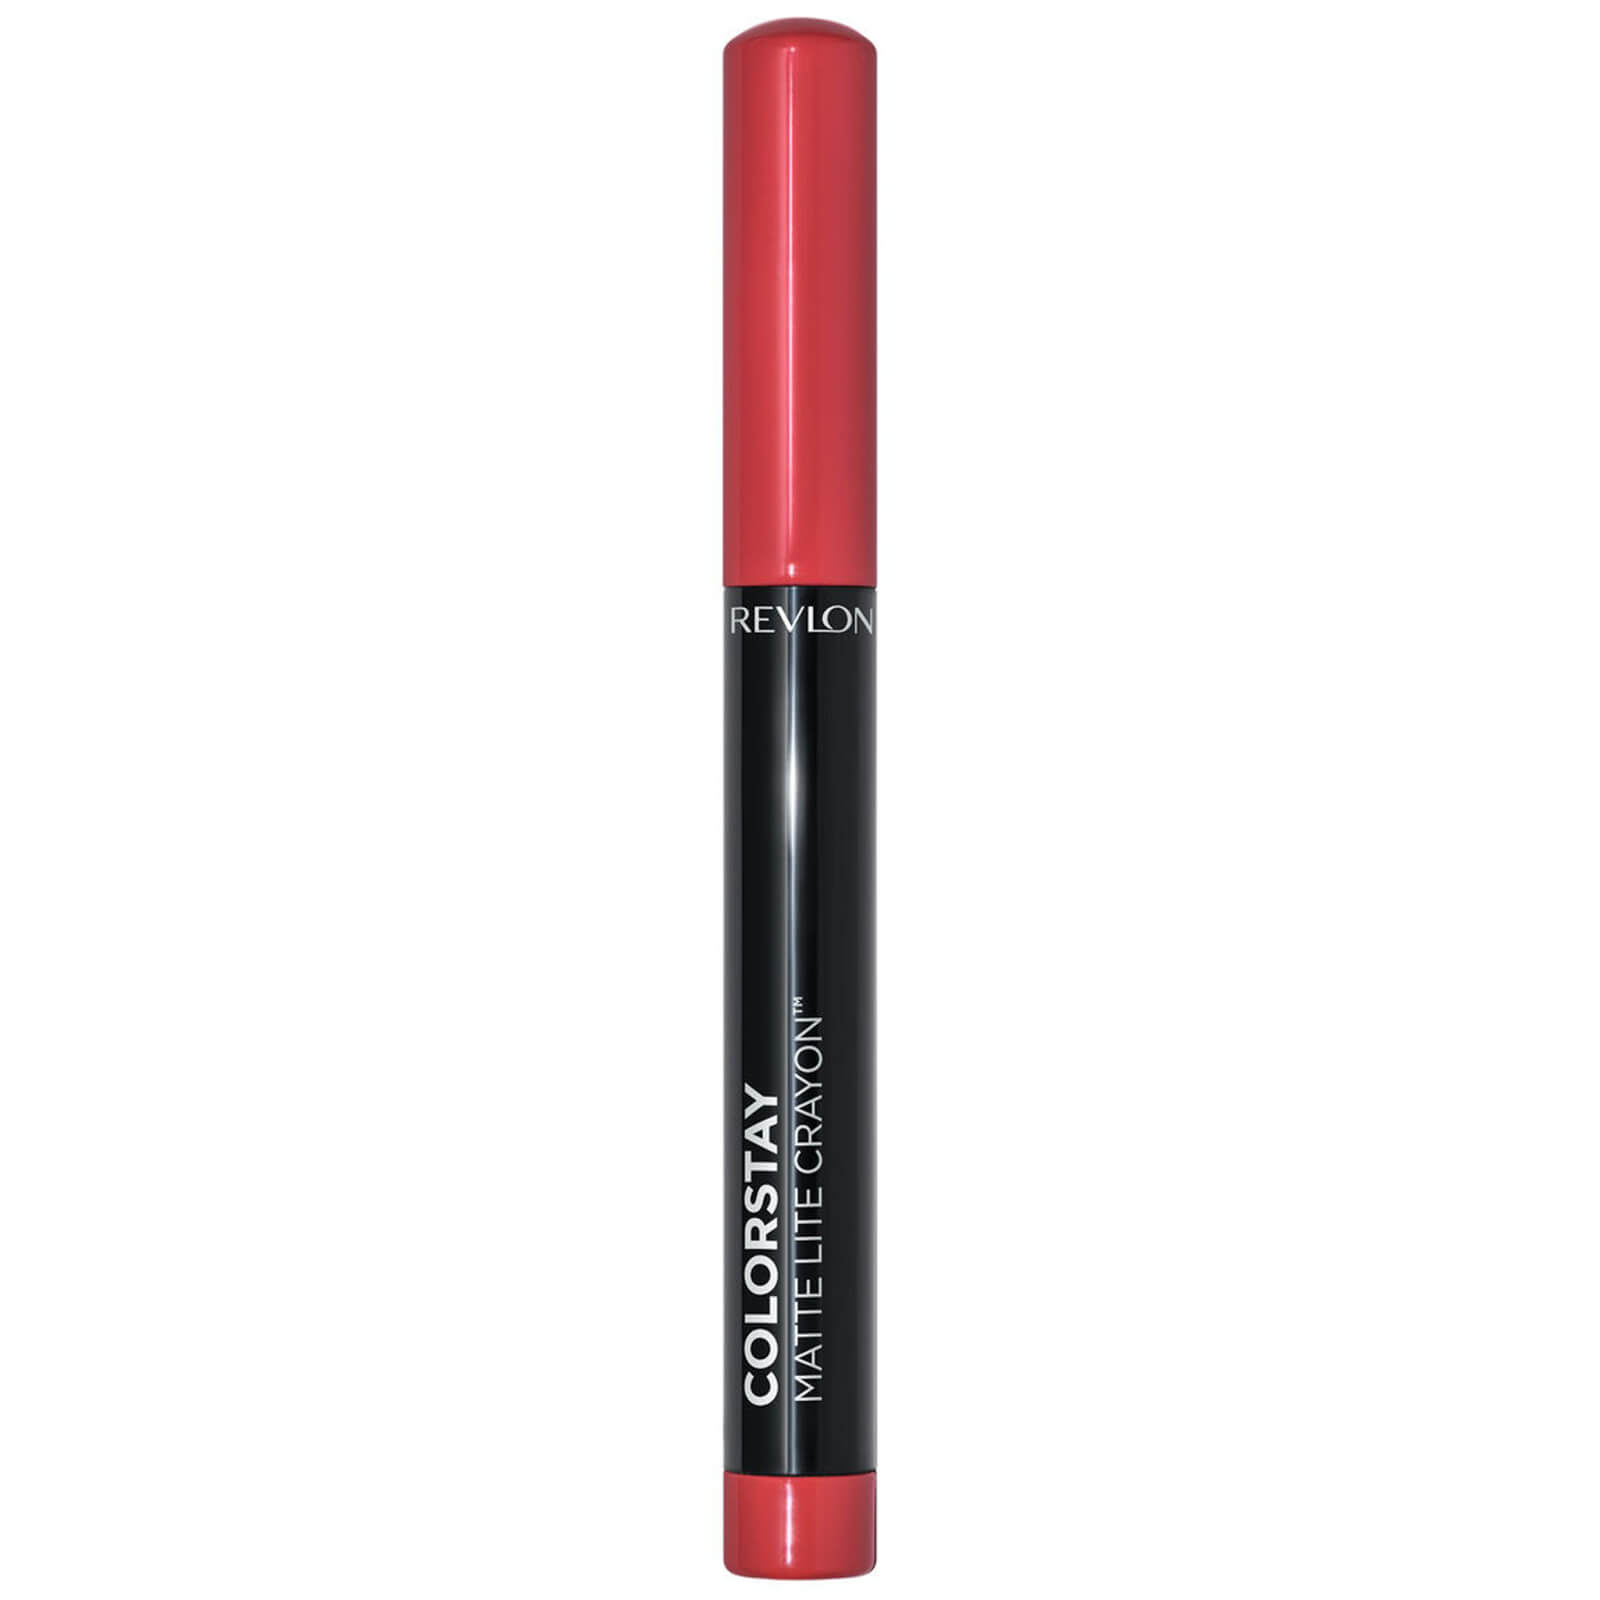 Revlon ColorStay Matte Lite Crayon 1.4g (Various Shades) - She's Fly